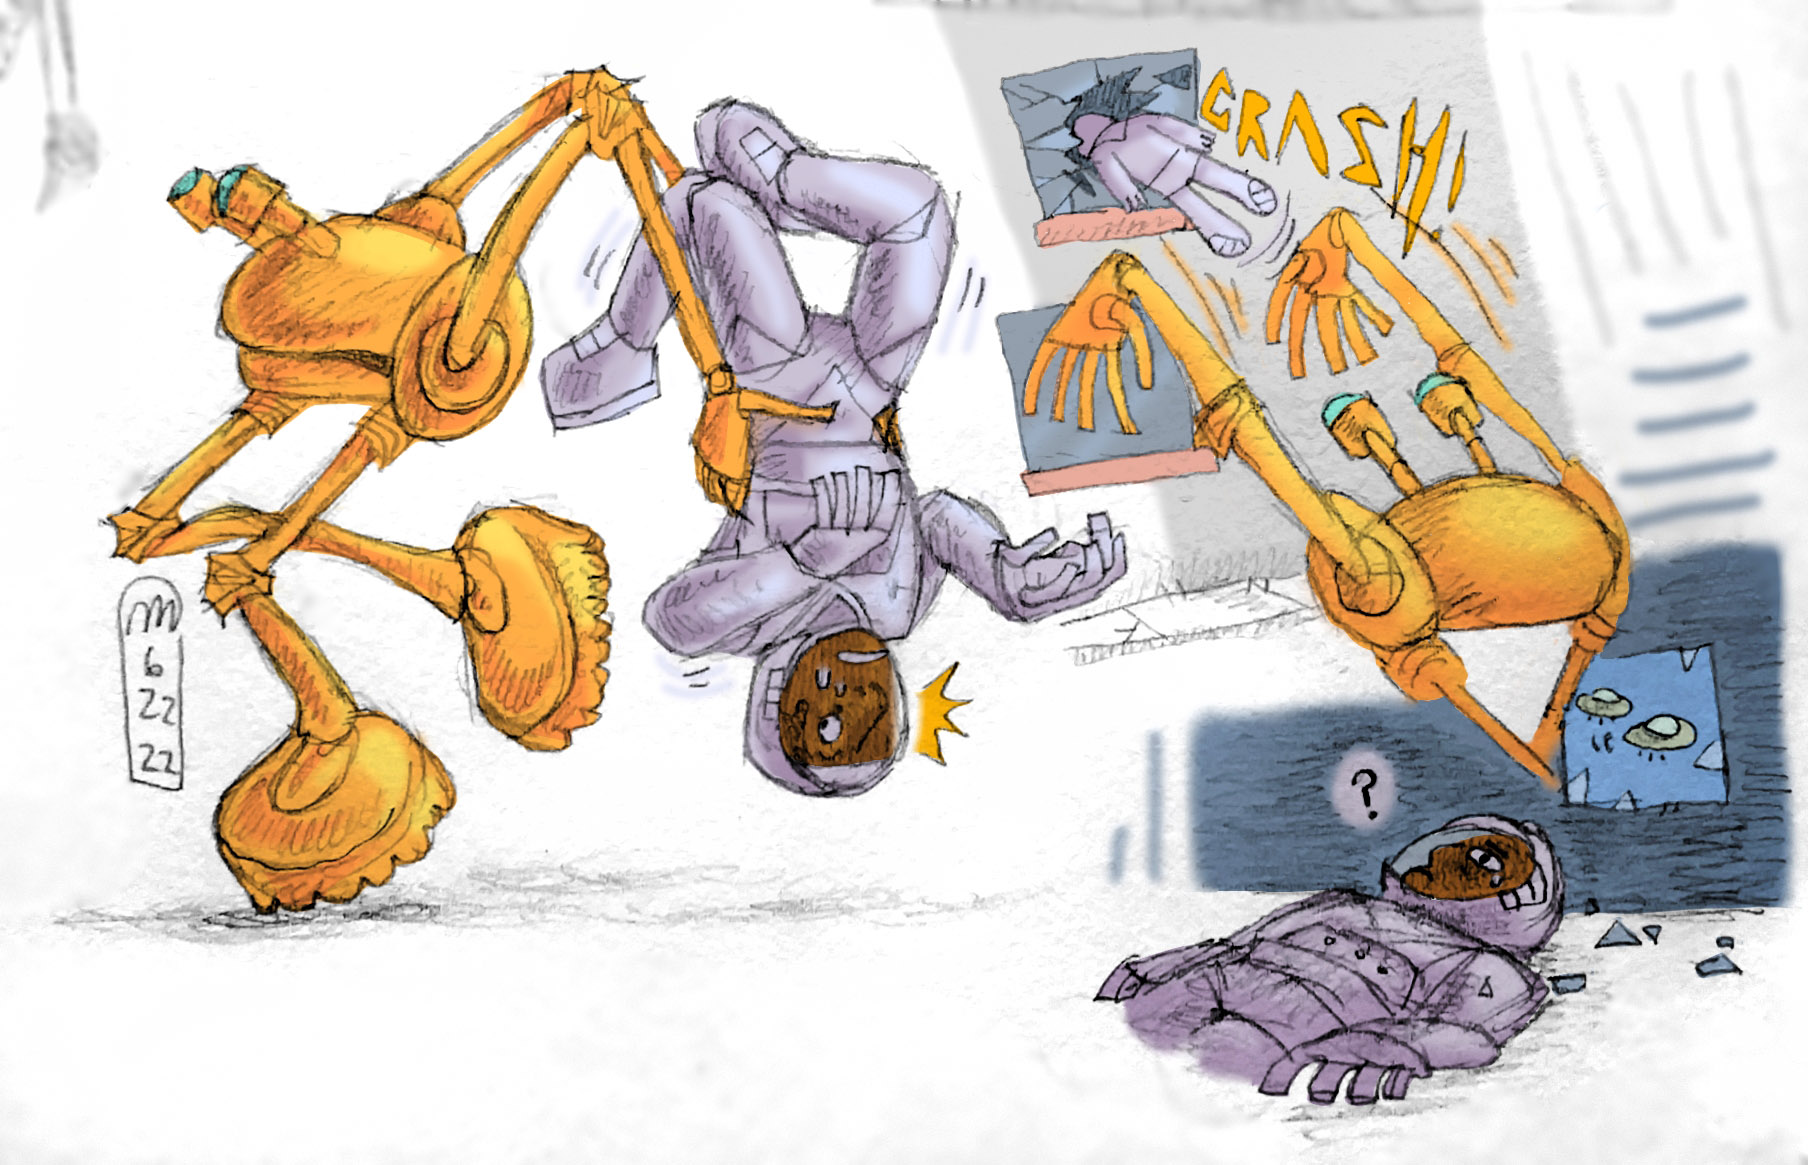 A comic of a squat orange robot with lanky humanoid limbs picking up a human in a silver spacesuit and throwing him through a window.